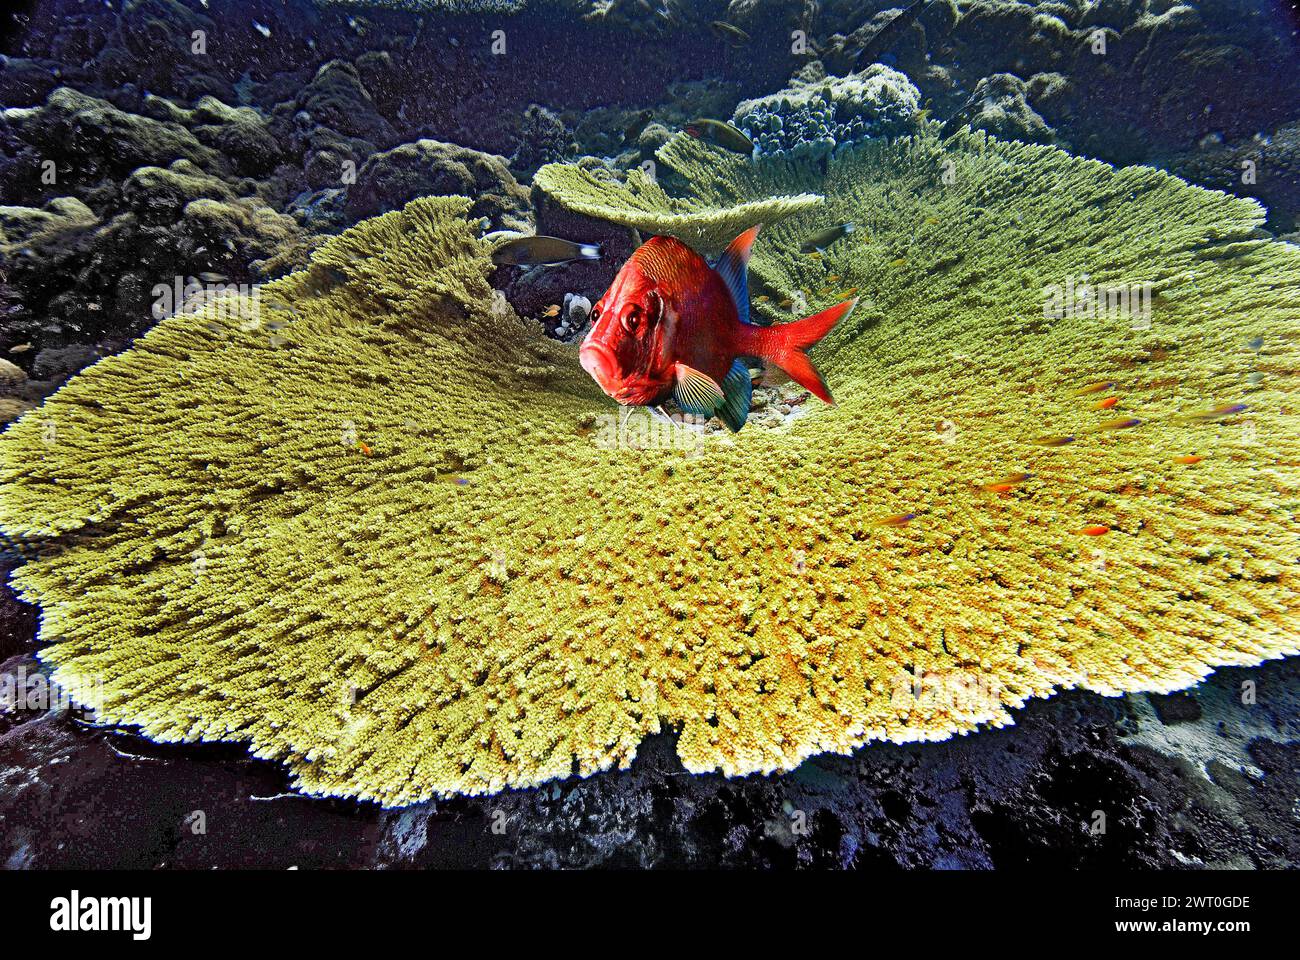 Photomontage fish, fine-branched table coral (Acropora spicifera), and large spined hussar fish (Sargocentron spiniferum), Vakarufalhi, Ari Atoll Stock Photo